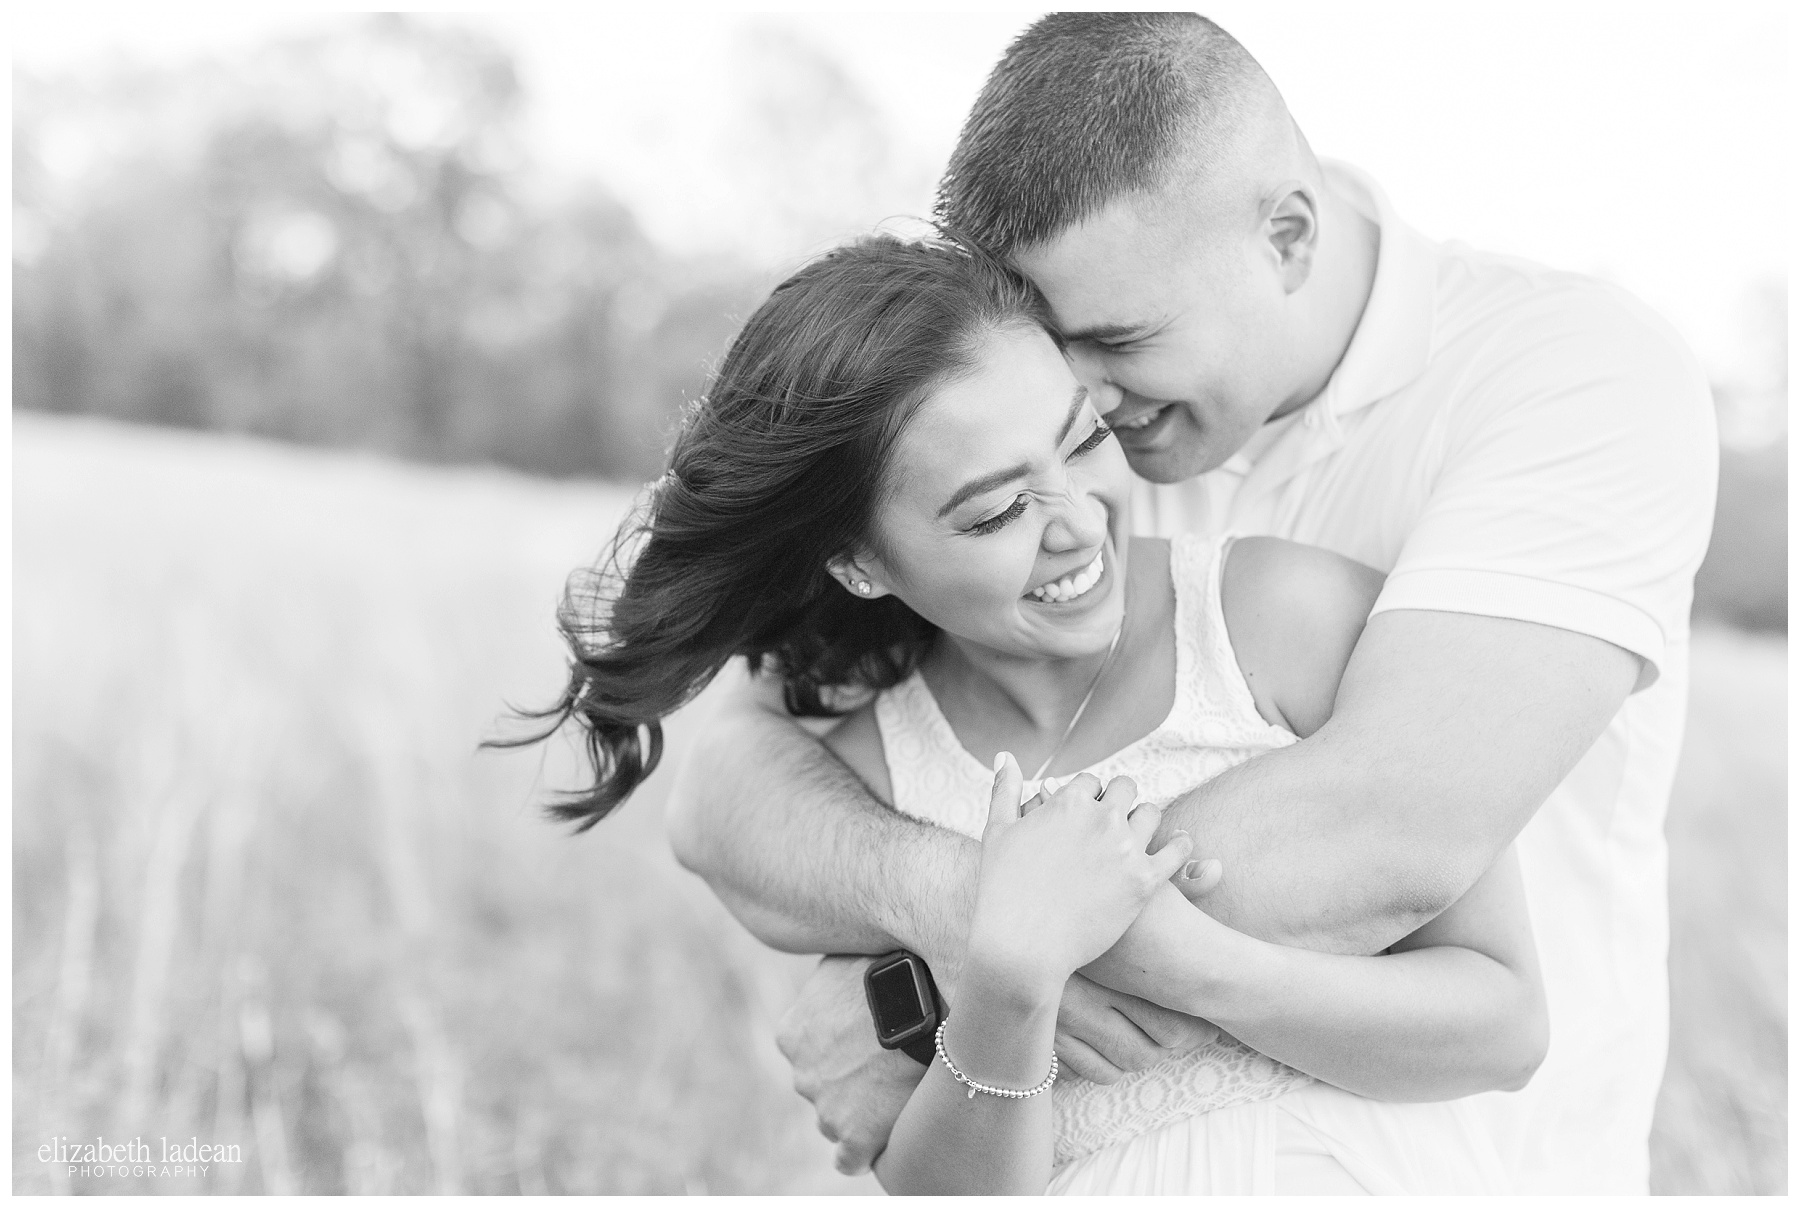 Black and white engagement photography